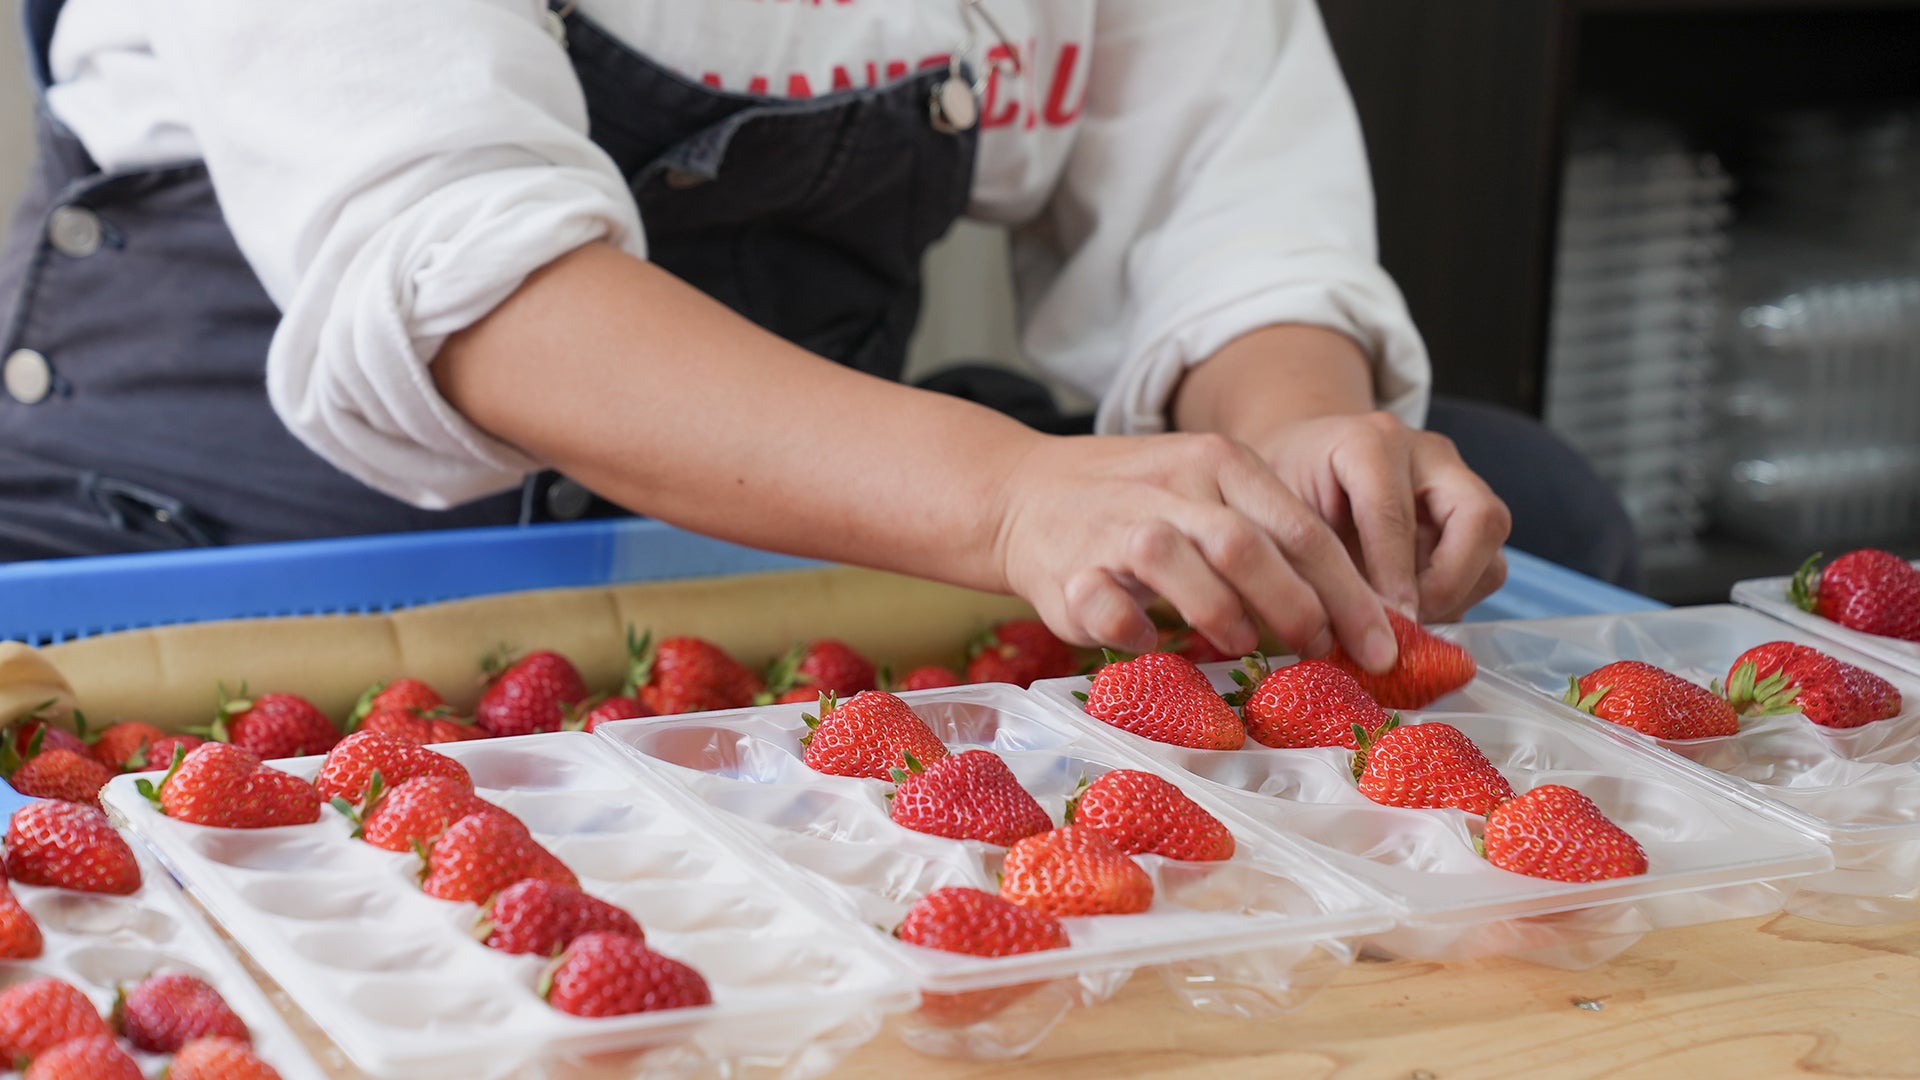 Image of strawberries being inspected